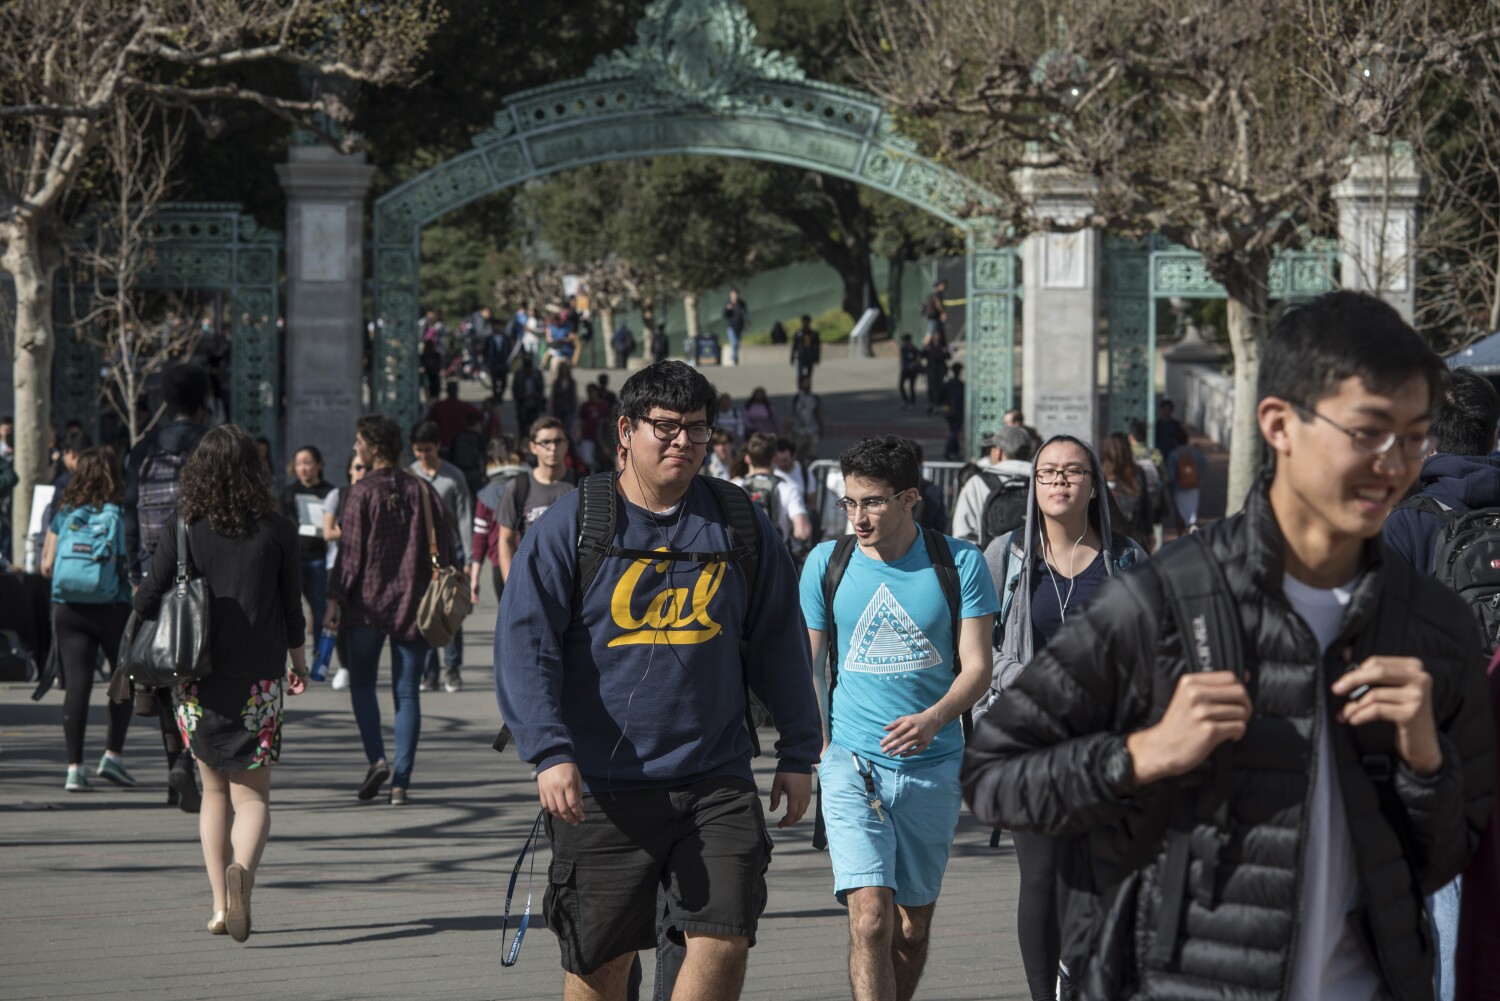 UC raises tuition despite student outcry, touting more financial aid and budget stability 